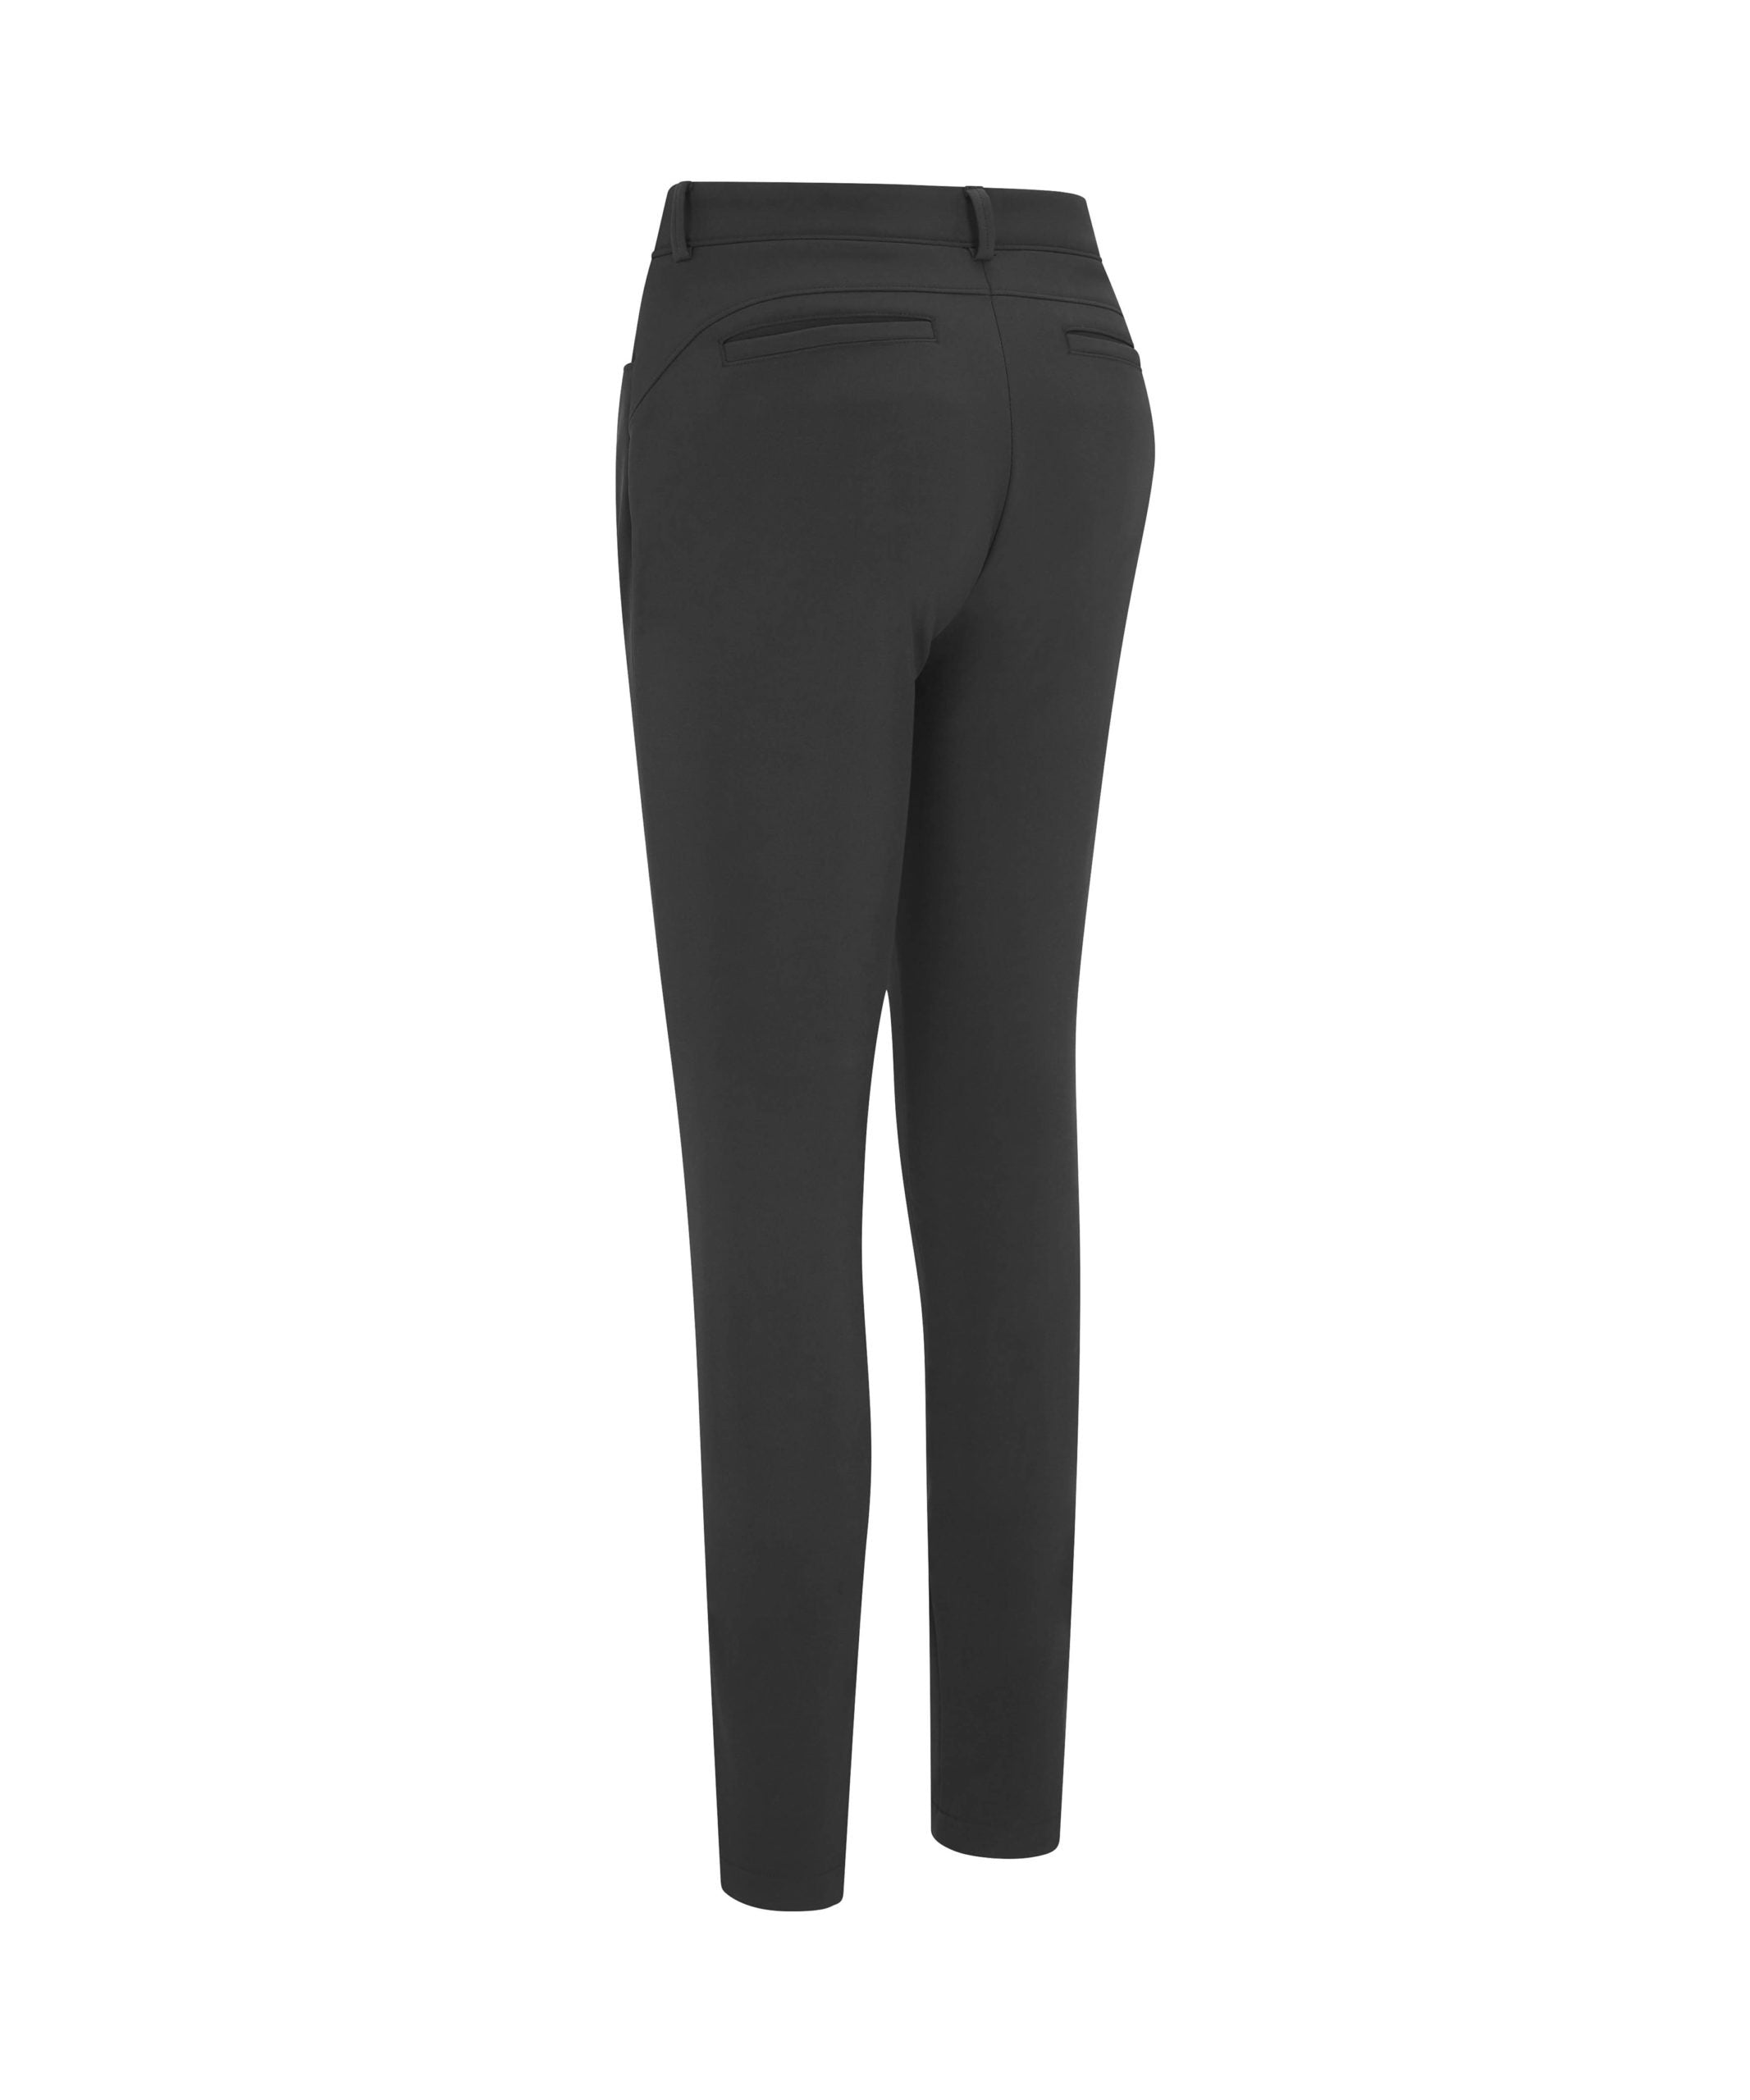 View Thermal Trousers In Caviar Caviar XL 32 information